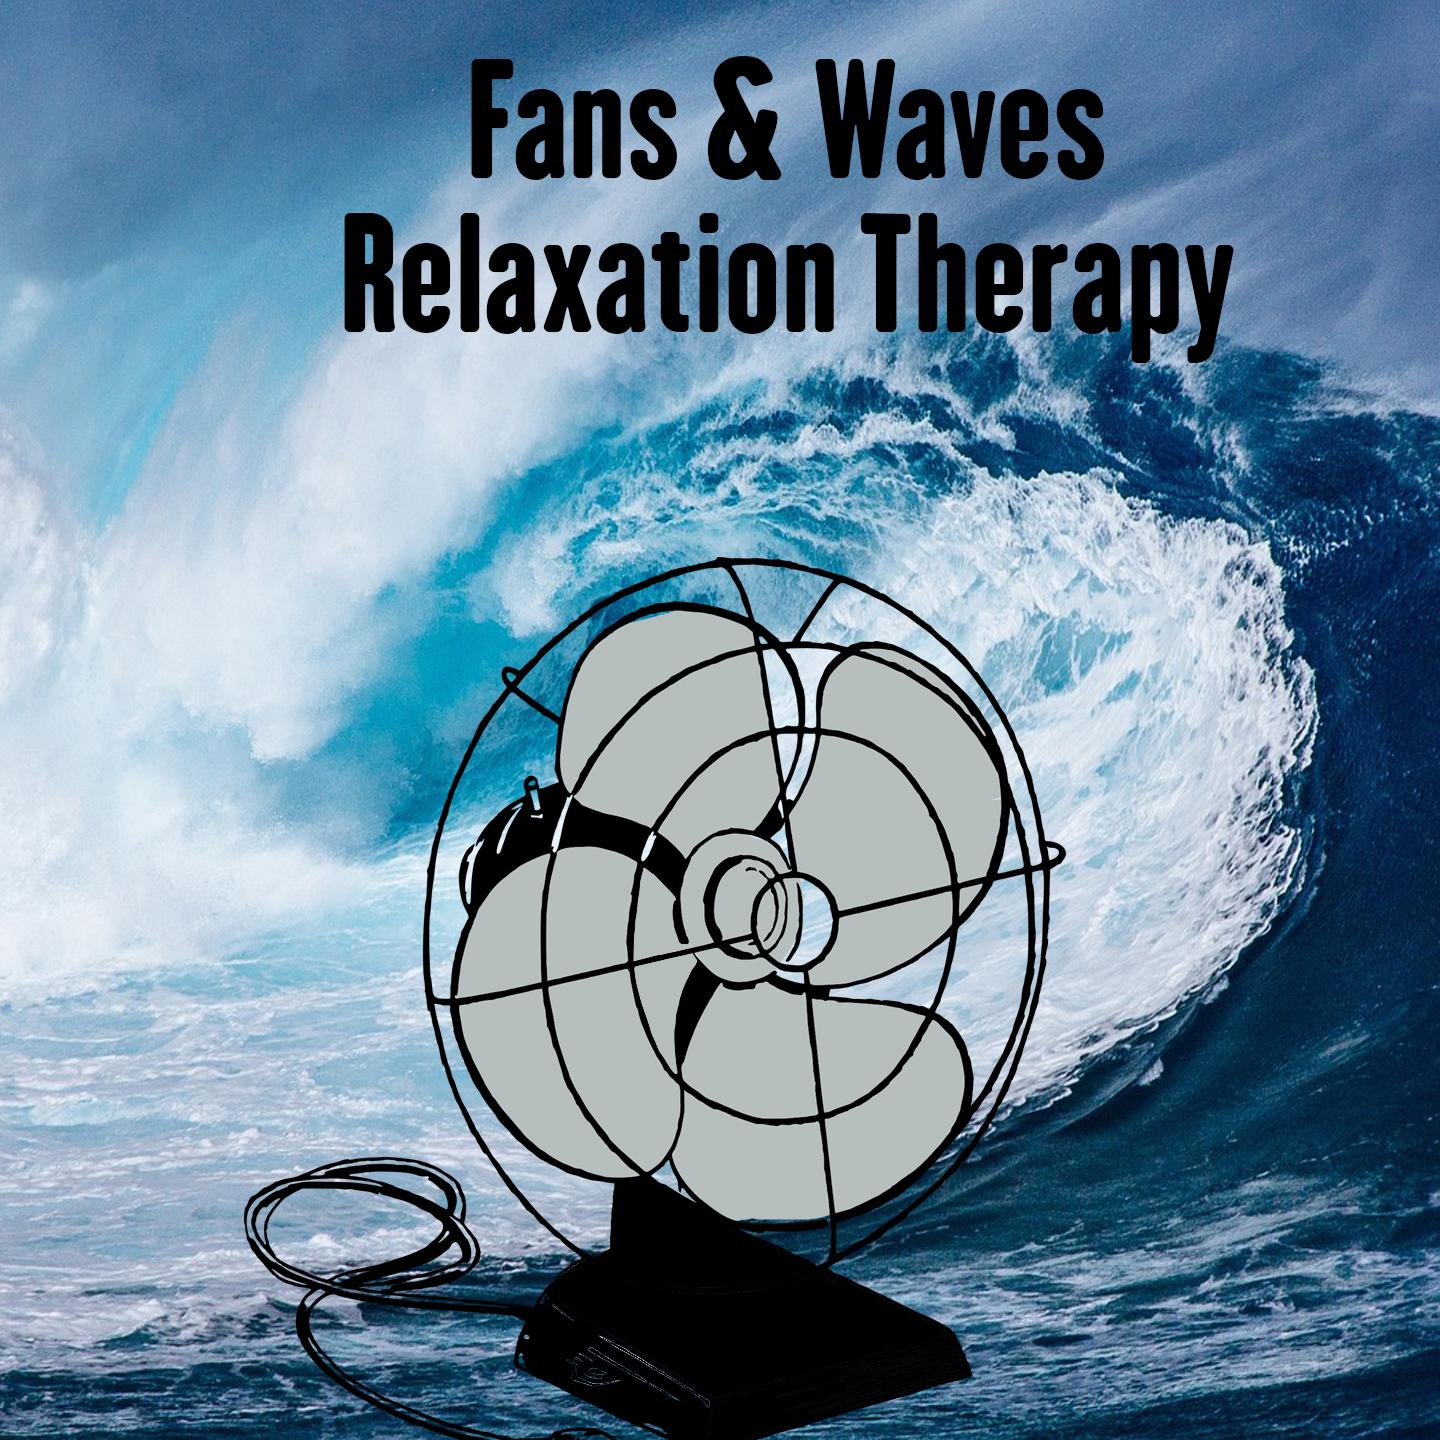 Fans & Waves Relaxation Therapy